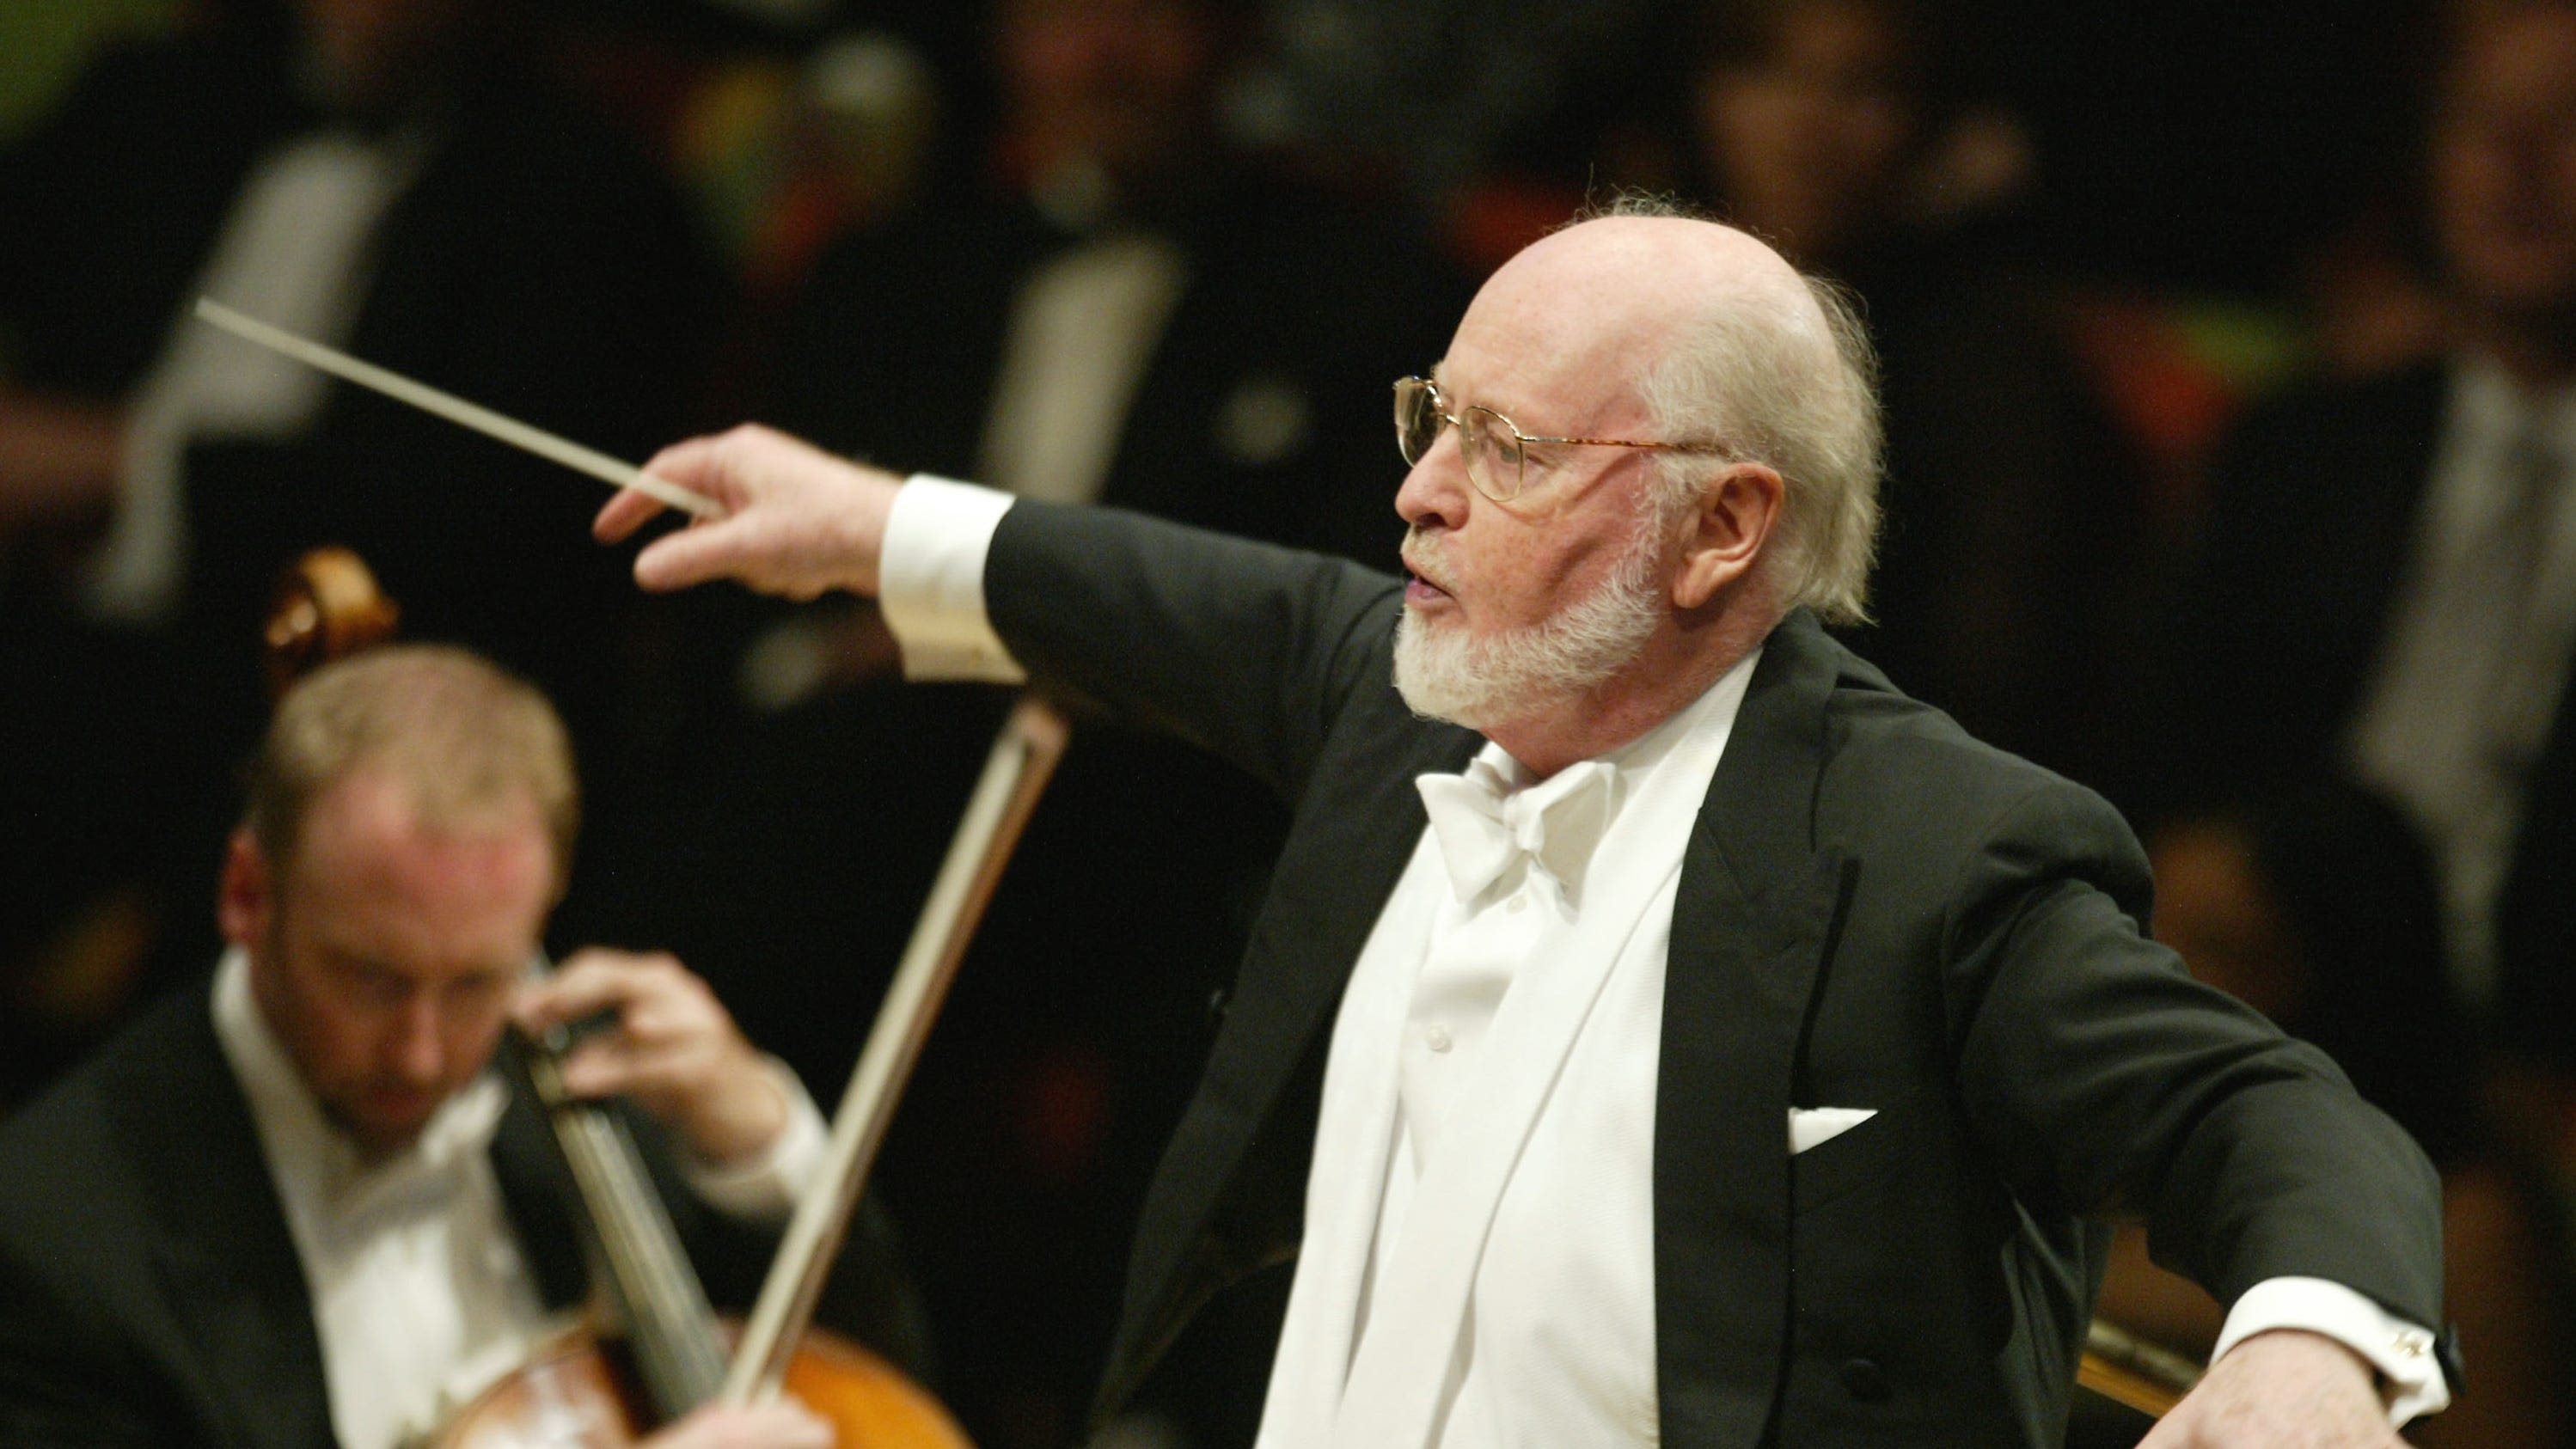 John Williams composed Olympic gold before 1984 LA Olympics